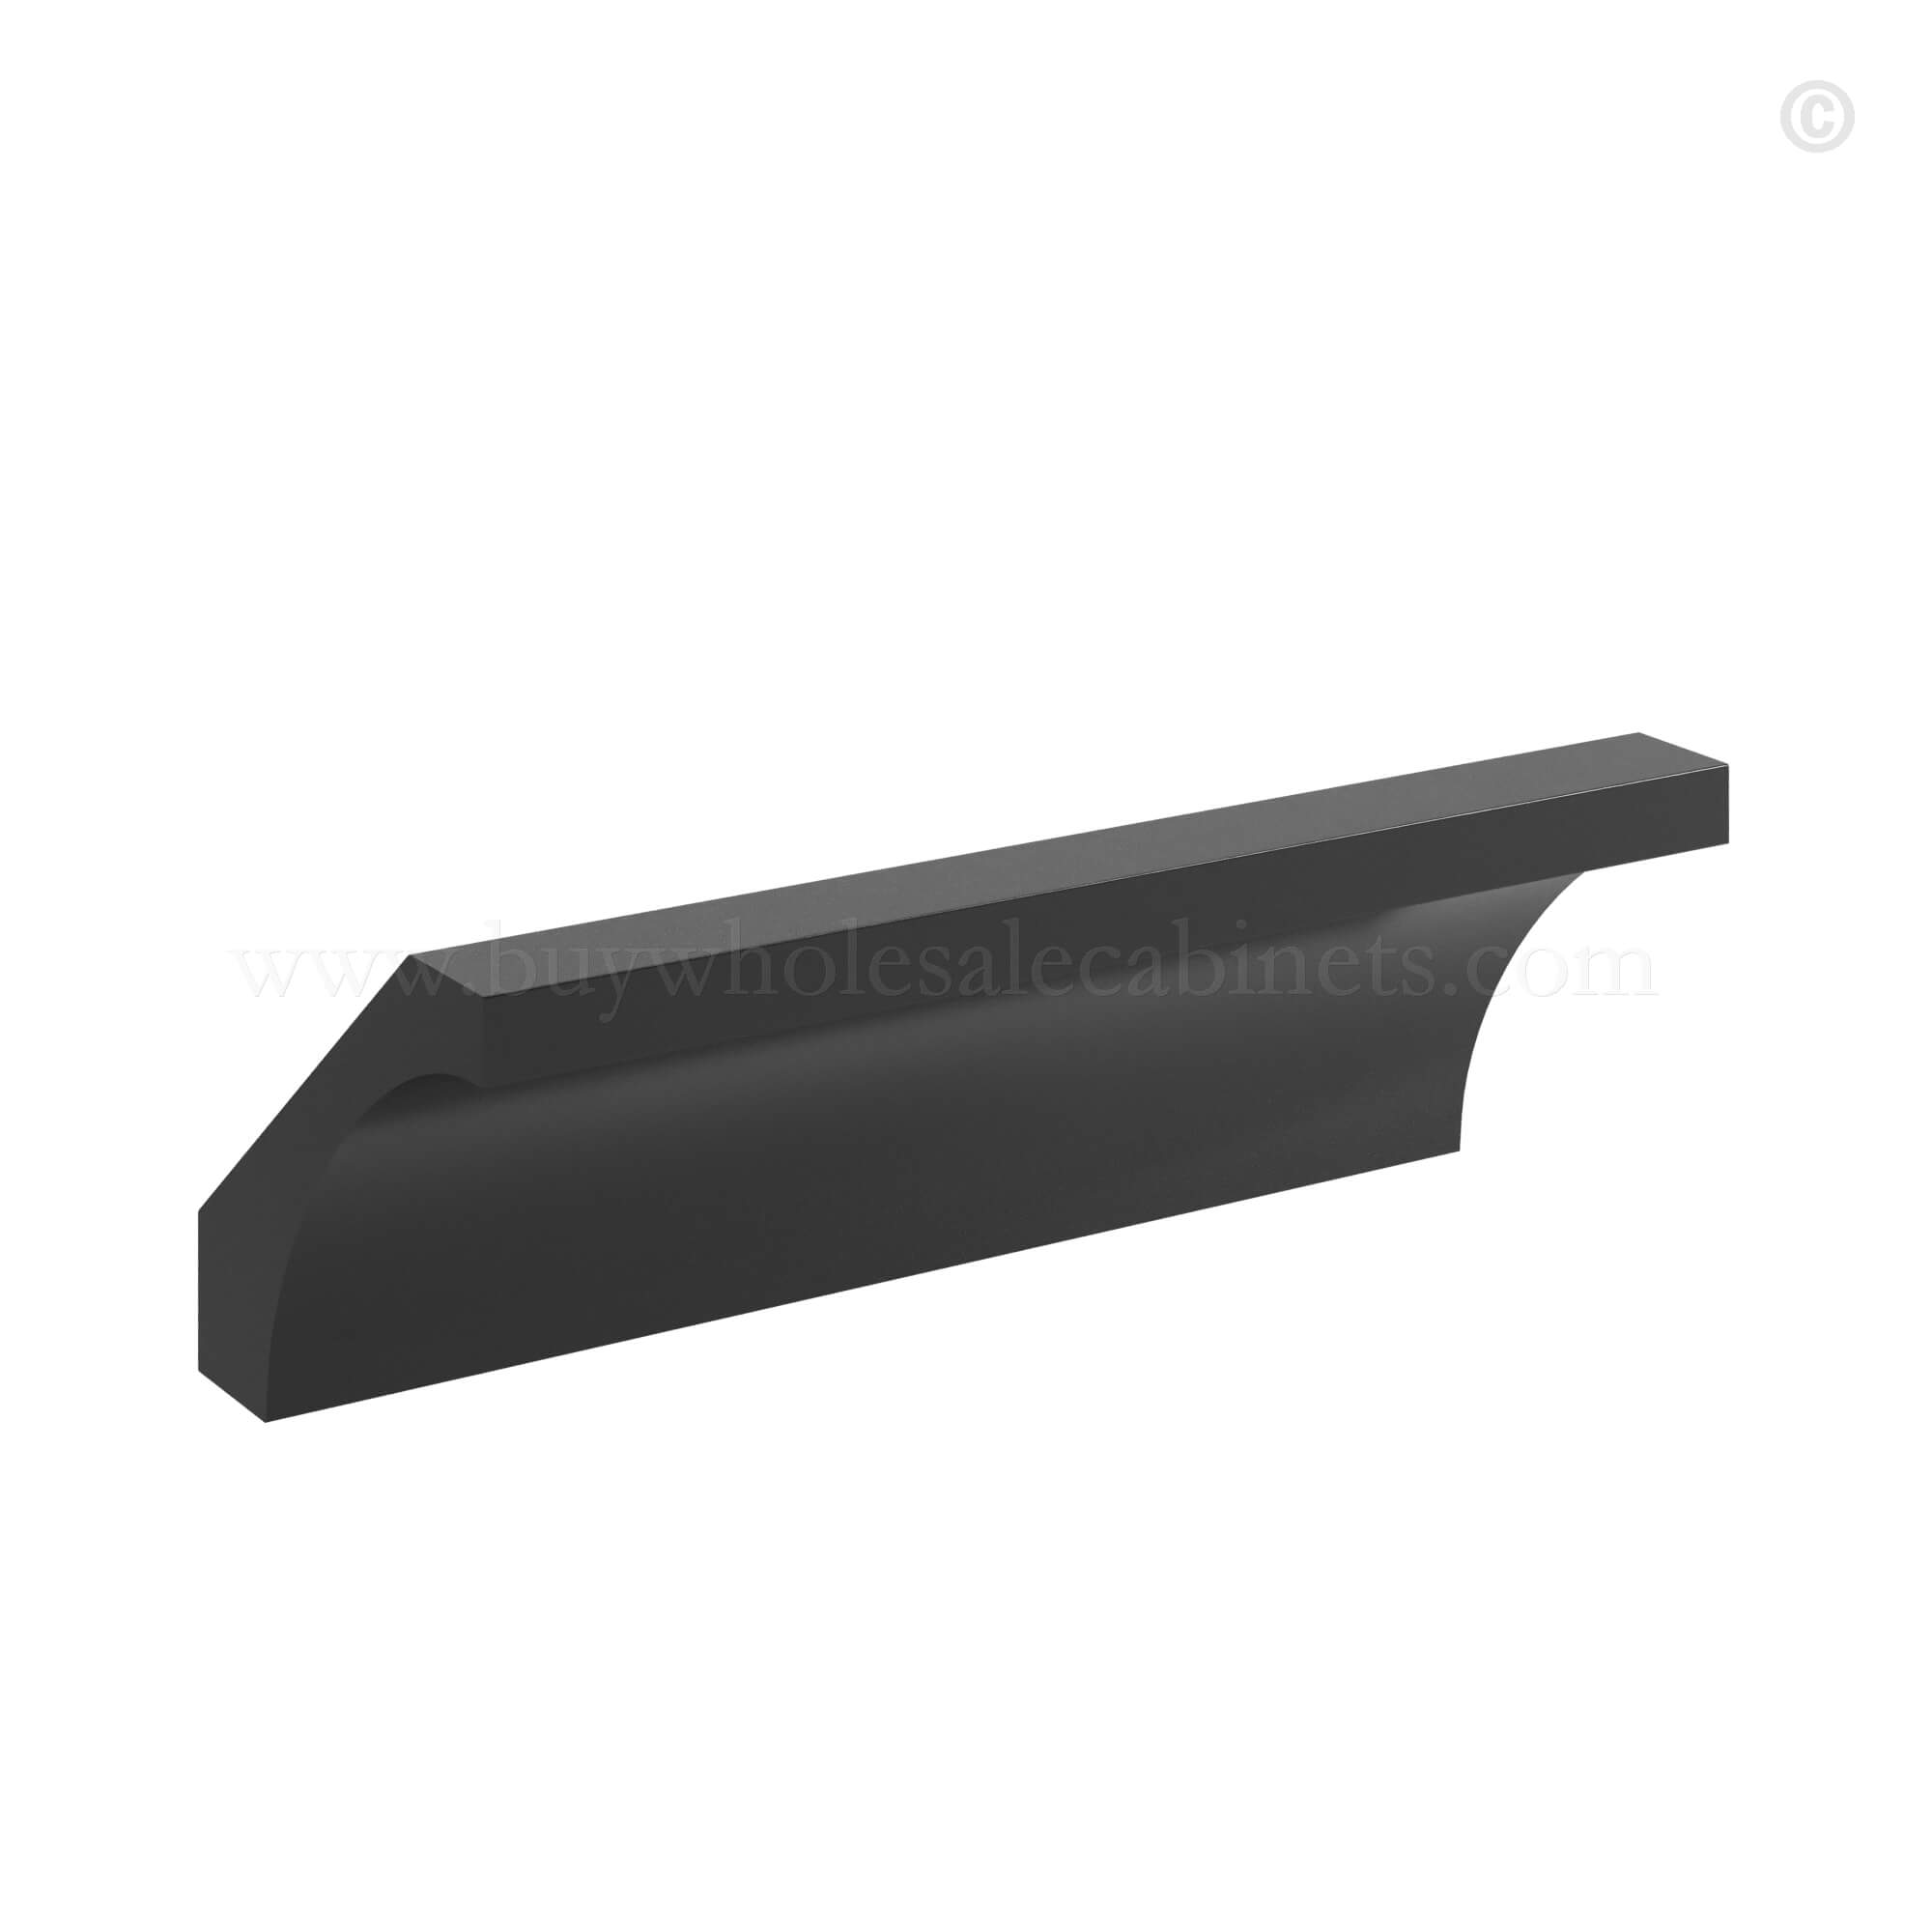 Black Shaker Crown Moulding 2 1/4″ Tall, rta cabinets, wholesale cabinets